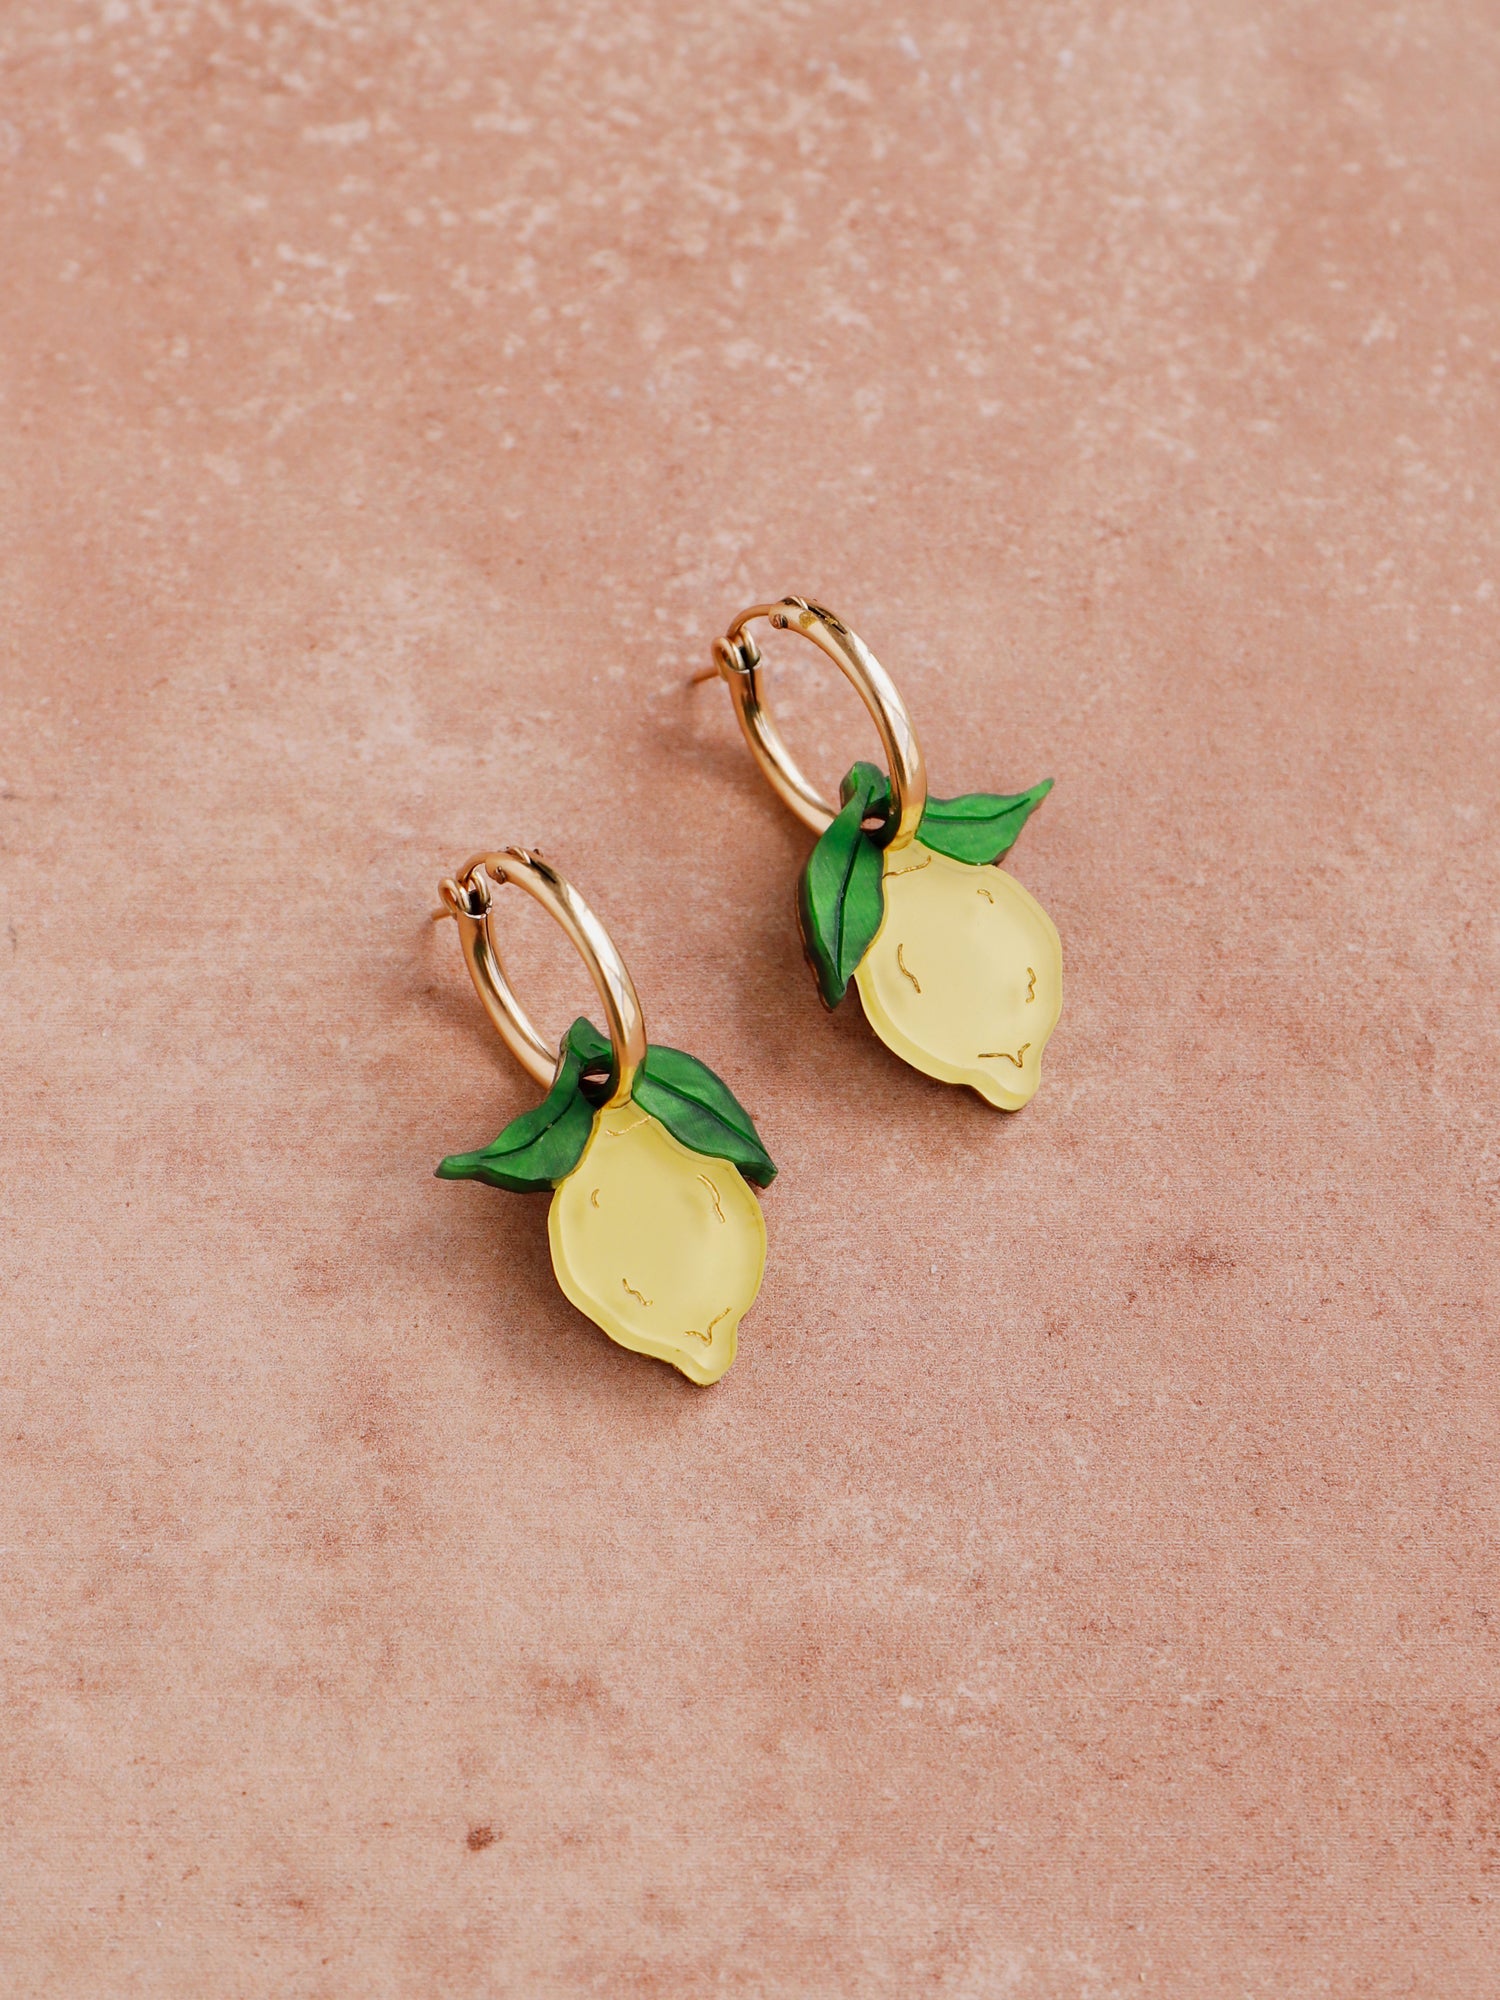 Lemon hoops made with wood, 64% recycled acrylic and hand-inked details with sterling silver earring posts & butterflies. Handmade in the UK at Wolf & Moon.